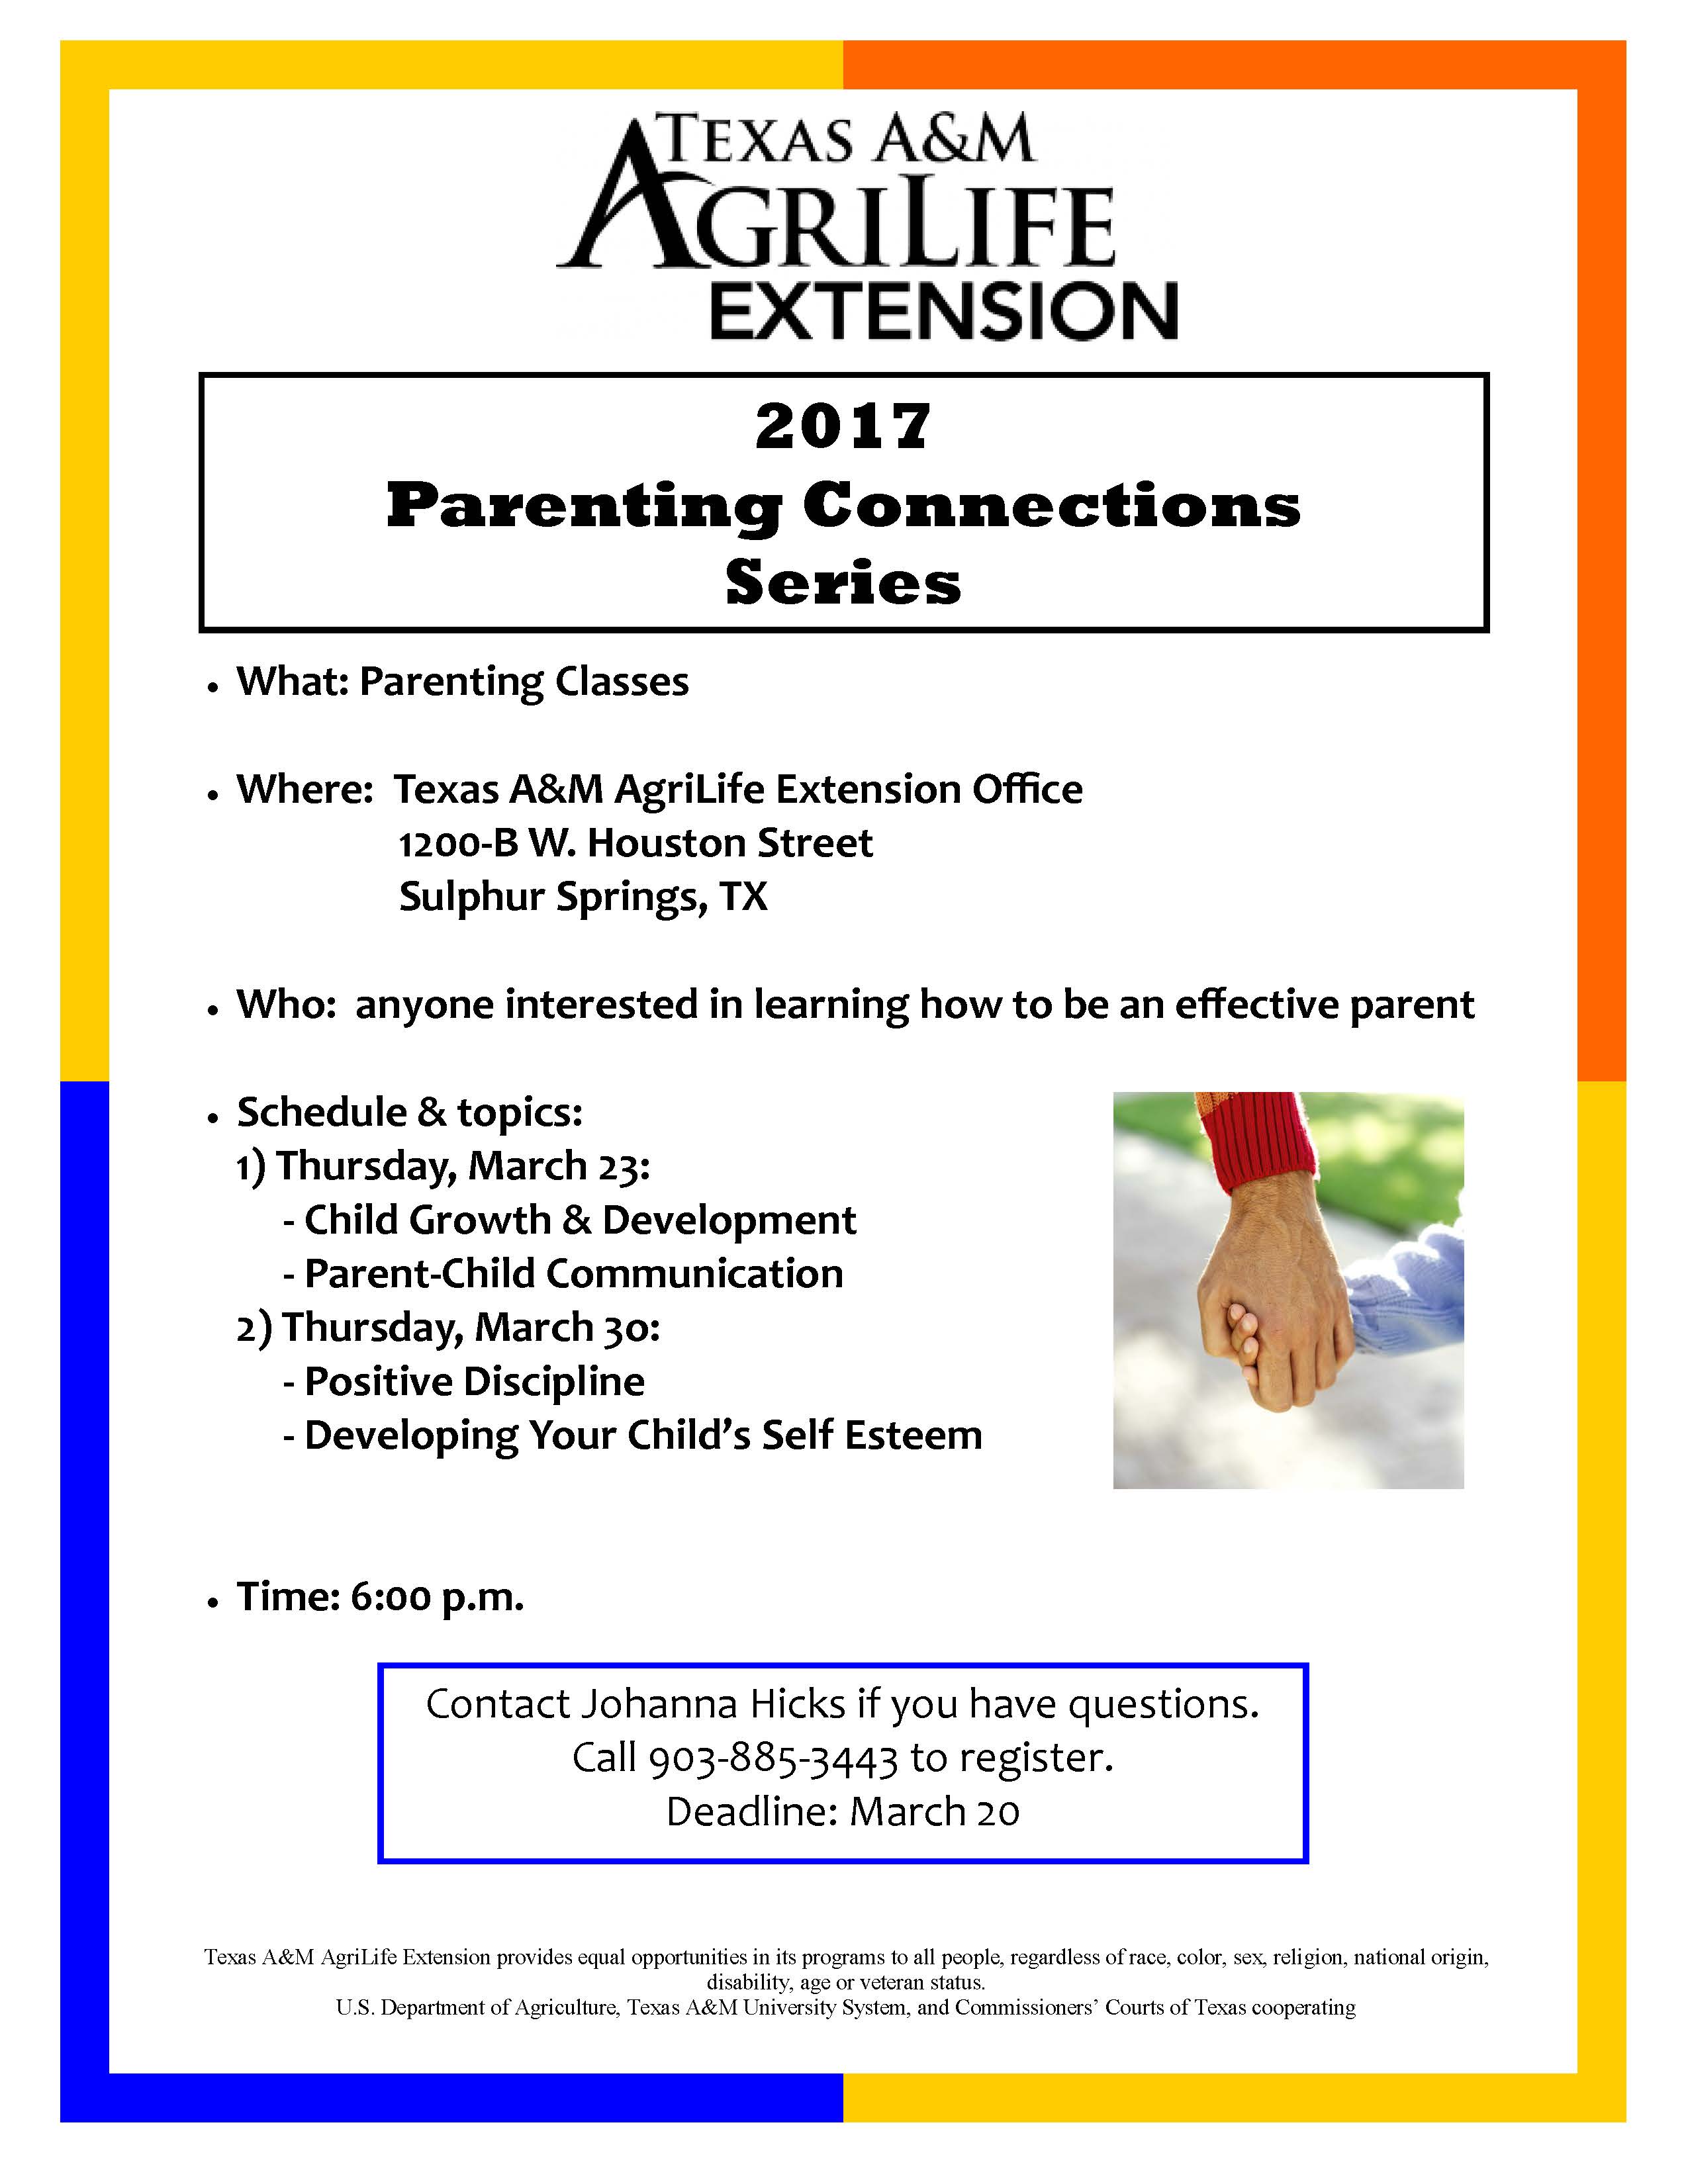 Texas A&M Agrilife Extension Office Hosting Parenting Classes and Diabetes Series